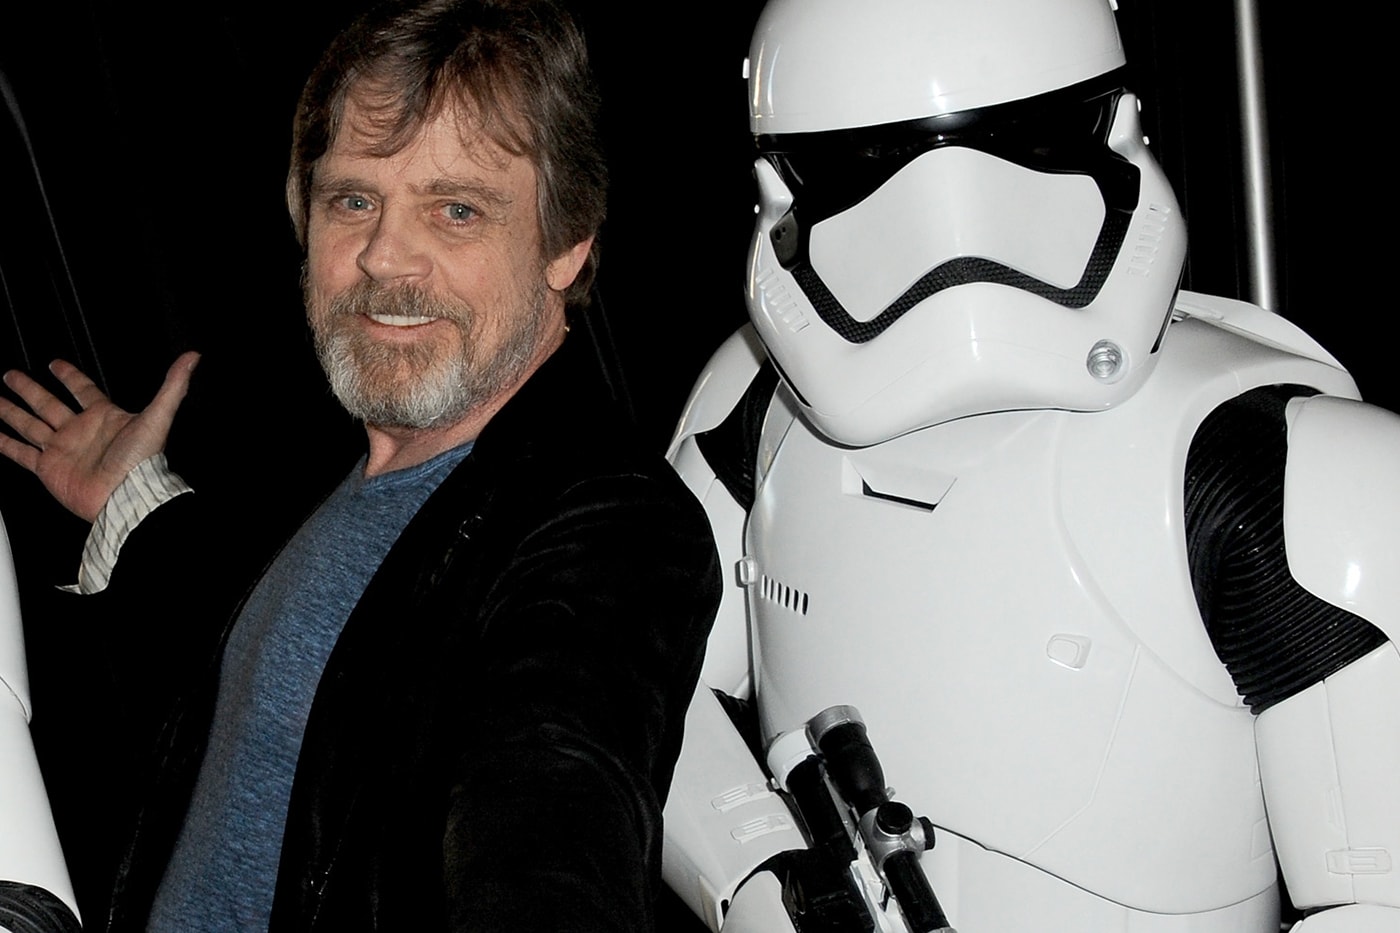 Mark Hamill star wars cameos since 2015 reveal Star Wars The Force Awakens The Last Jedi Rise of Skywalker Rogue One Solo Dobbu Scay Booli EV-9D9 The Mandalorian voice acting entertainment 